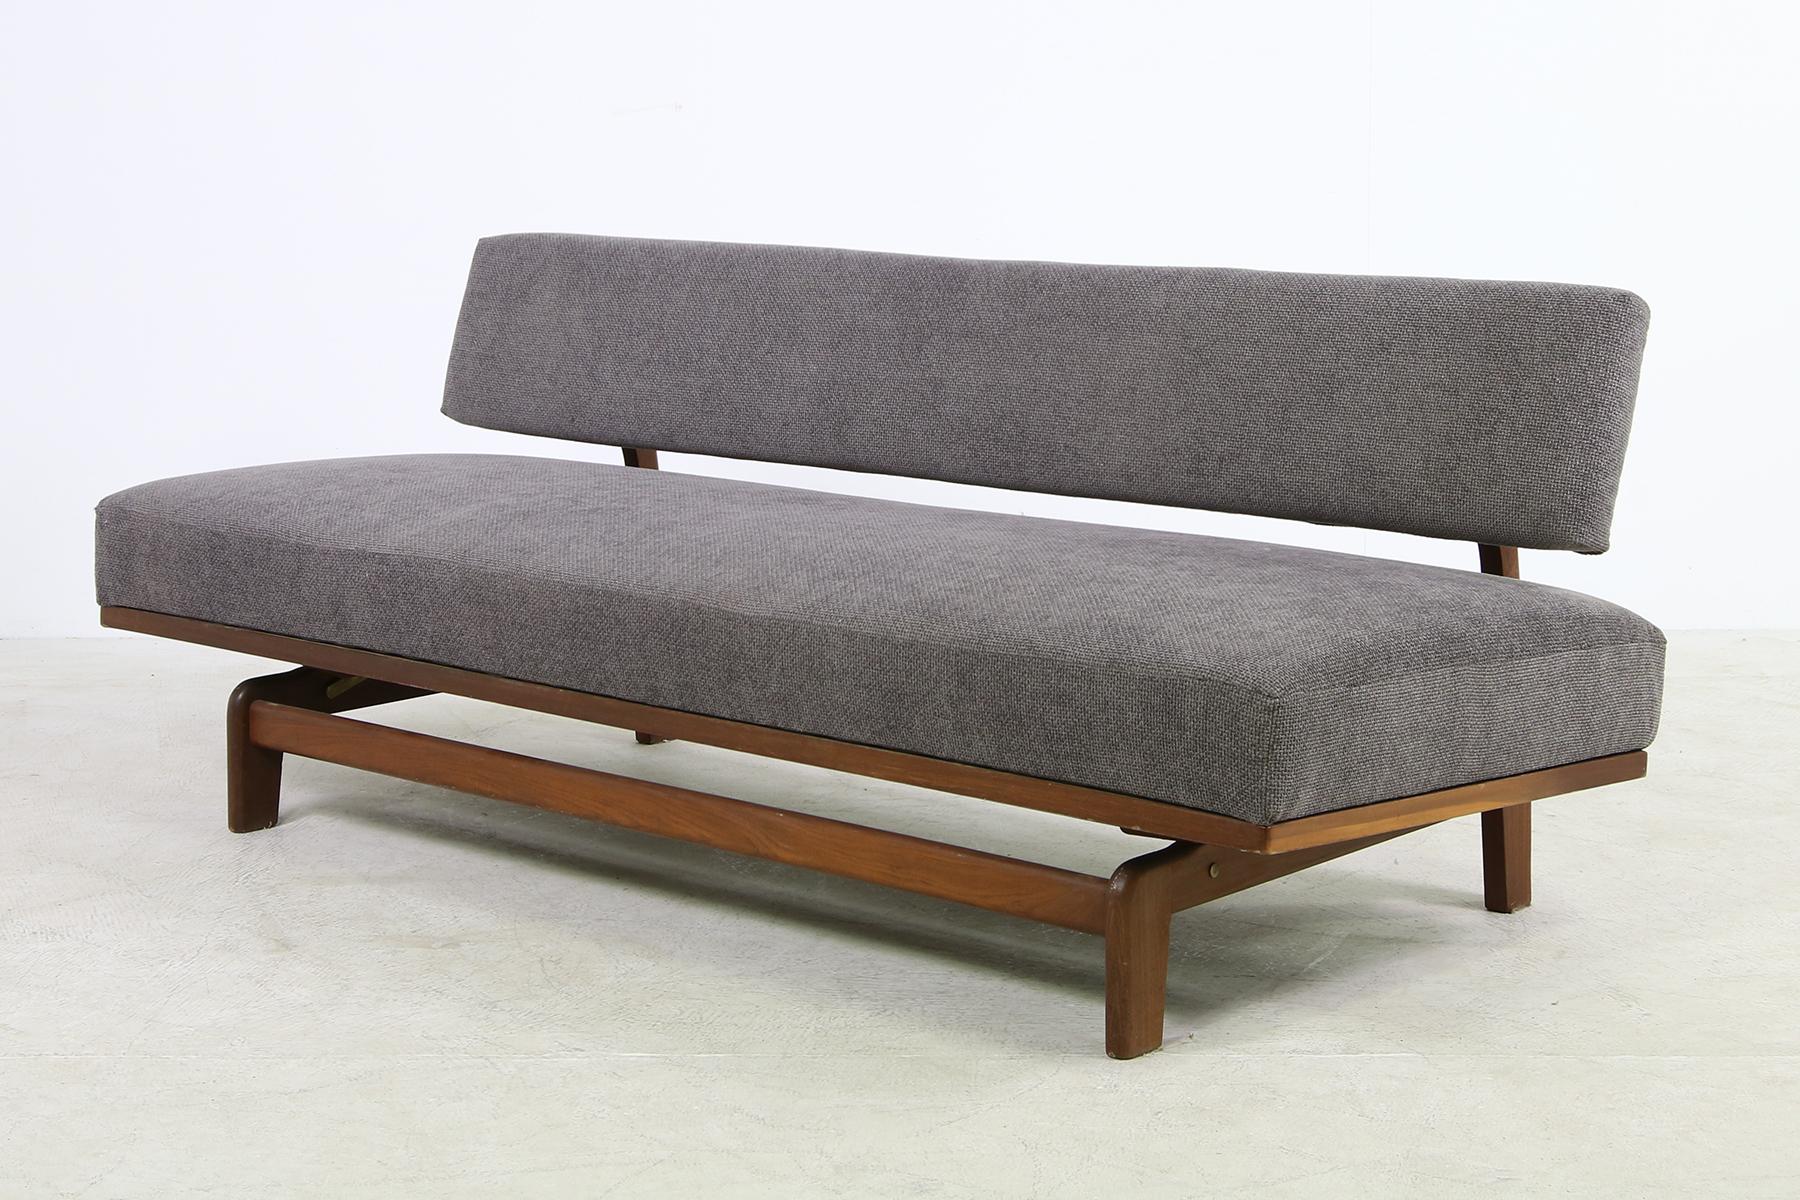 Extendable 1960s Daybed by Hans Bellmann Mod. 470 for Wilkhahn Germany Teak Sofa In Good Condition For Sale In Hamminkeln, DE